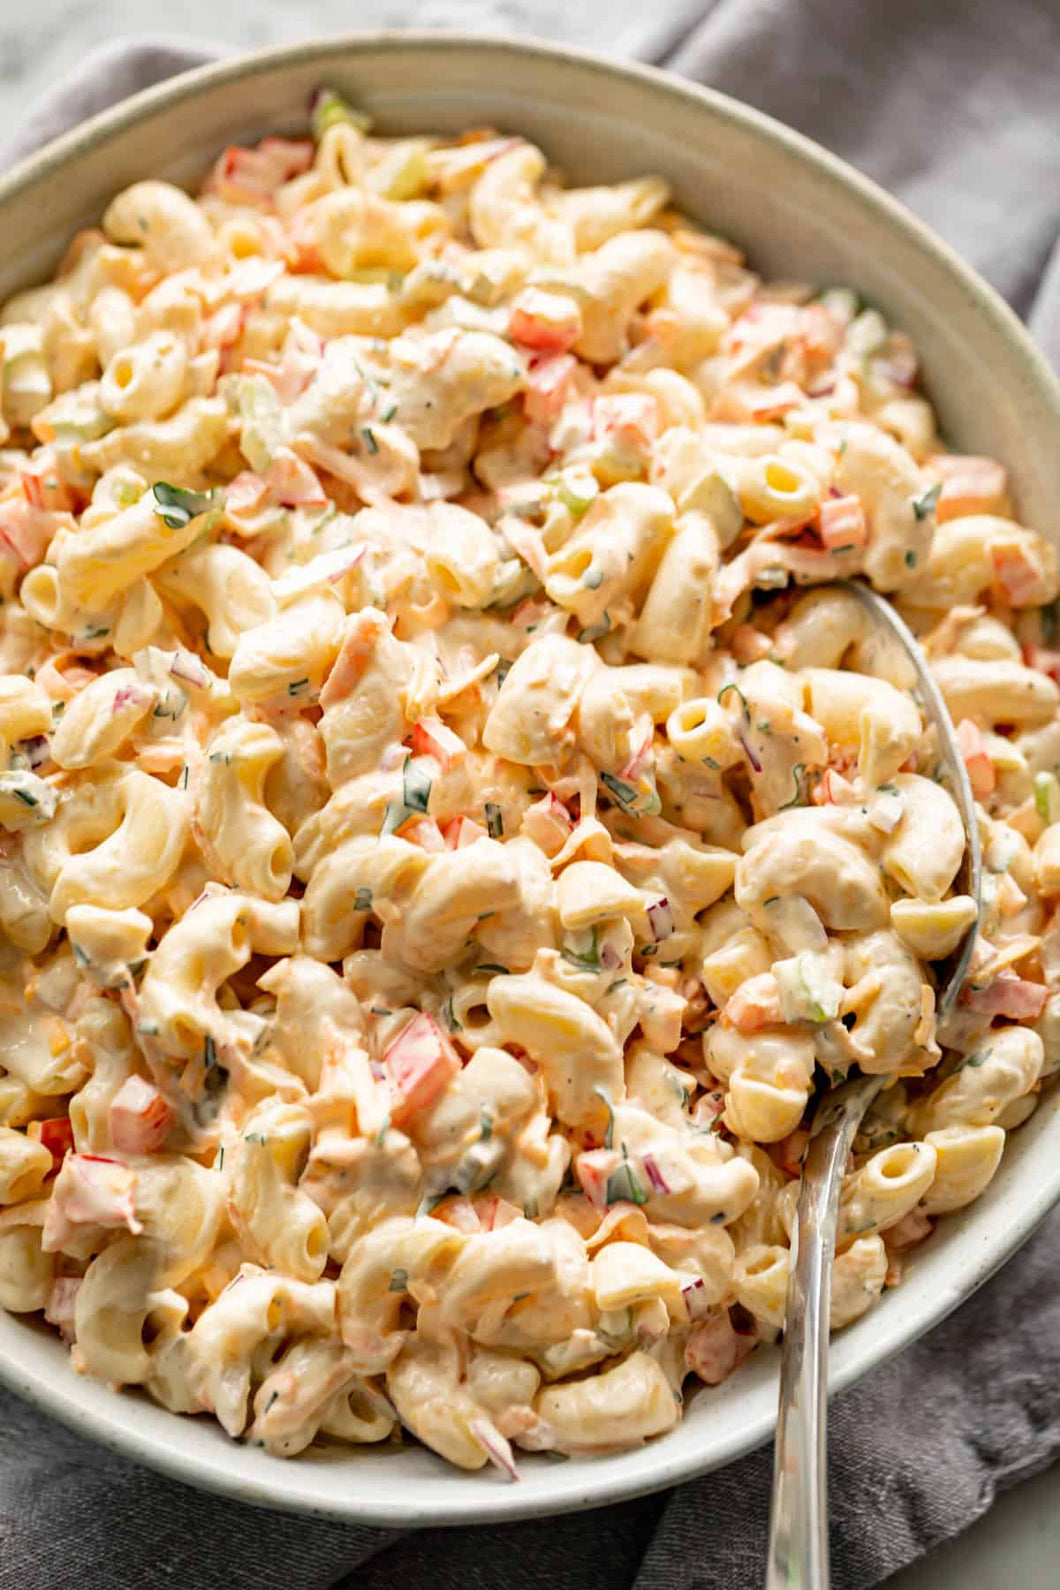 NEW! 8 ounce Container of Macaroni Salad for Memorial Day